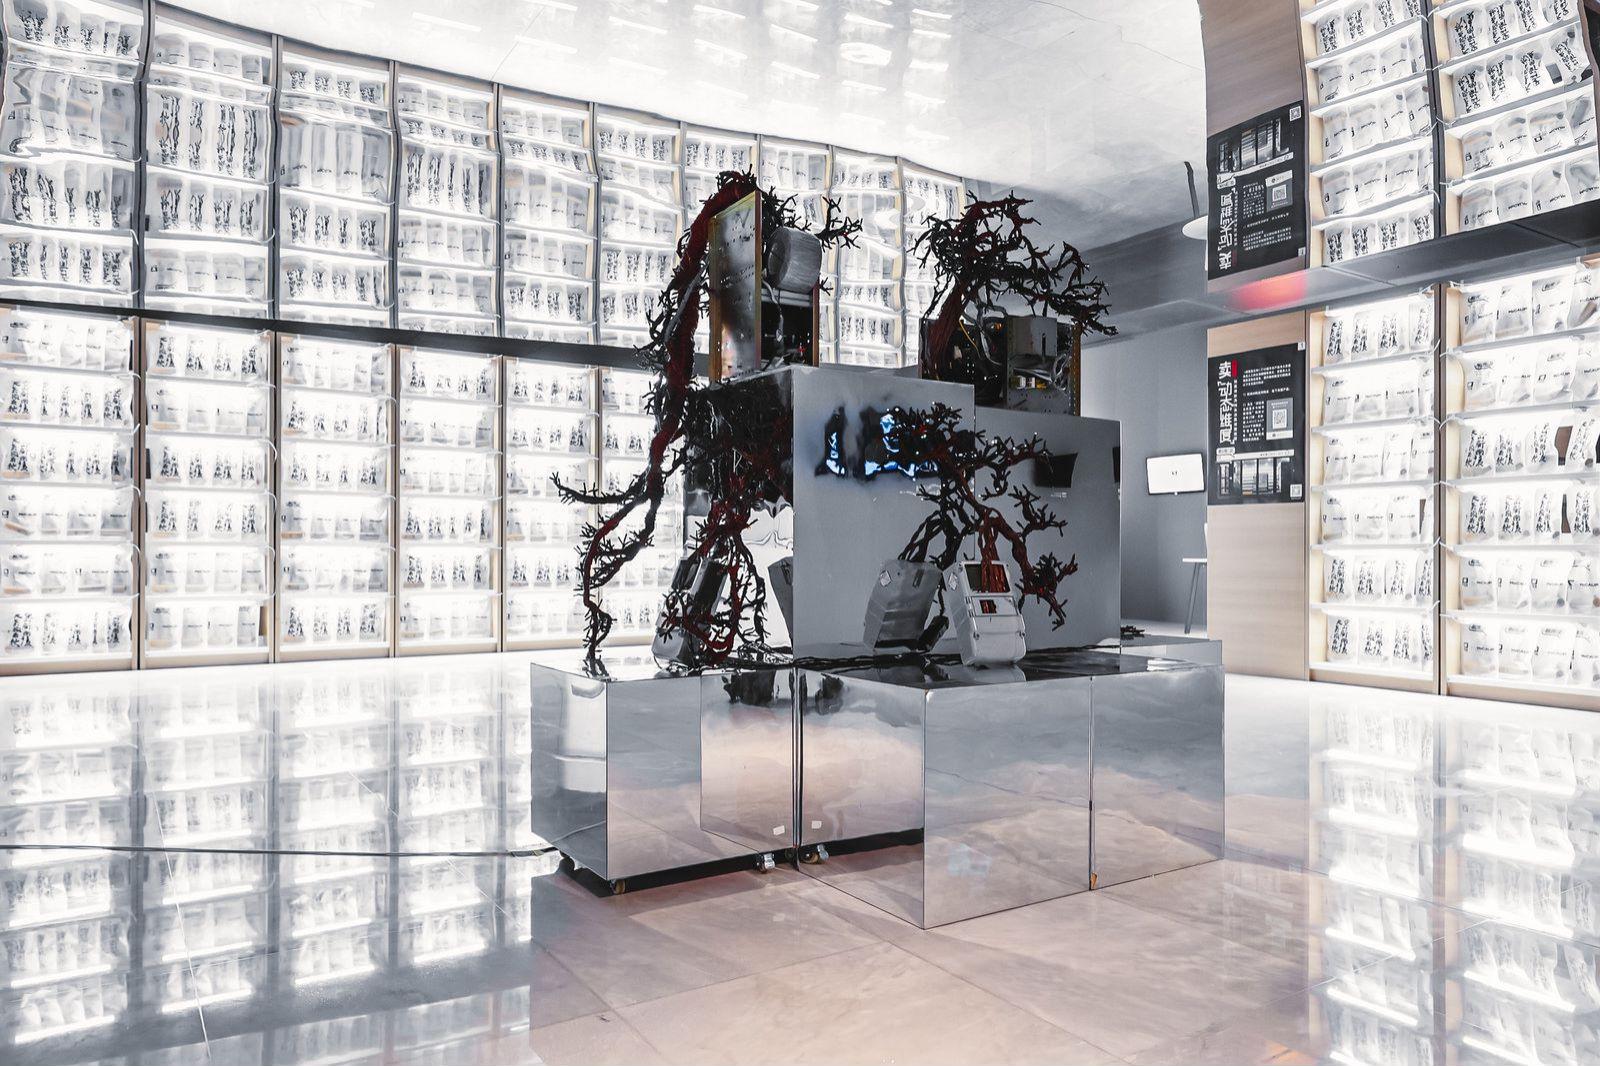 The Shenzhen stop of the "2022 Hong Kong-Macao Visual Art Biennale" is taking place at the Museum of Contemporary Art & Planning in Shenzhen. Photo shows part of the exhibition gallery of the Mainland section.